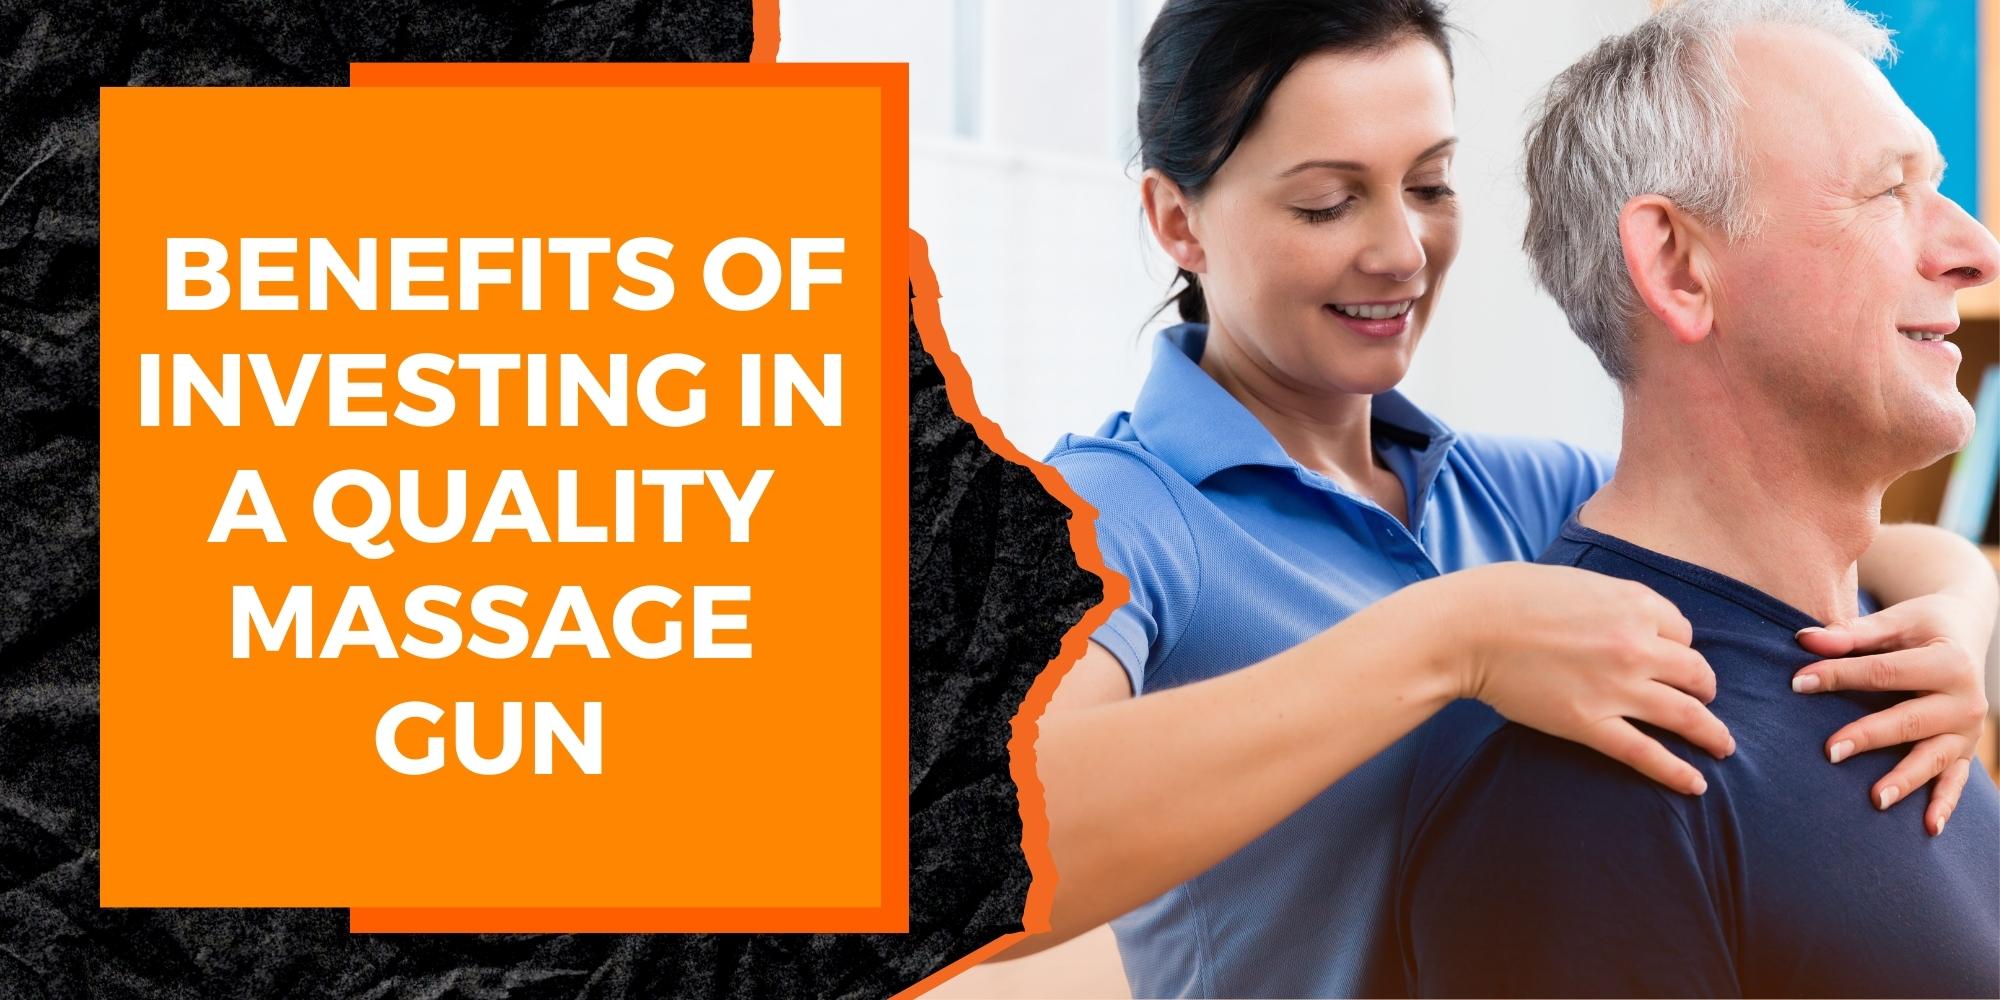 The Benefits of Investing in a Quality Massage Gun